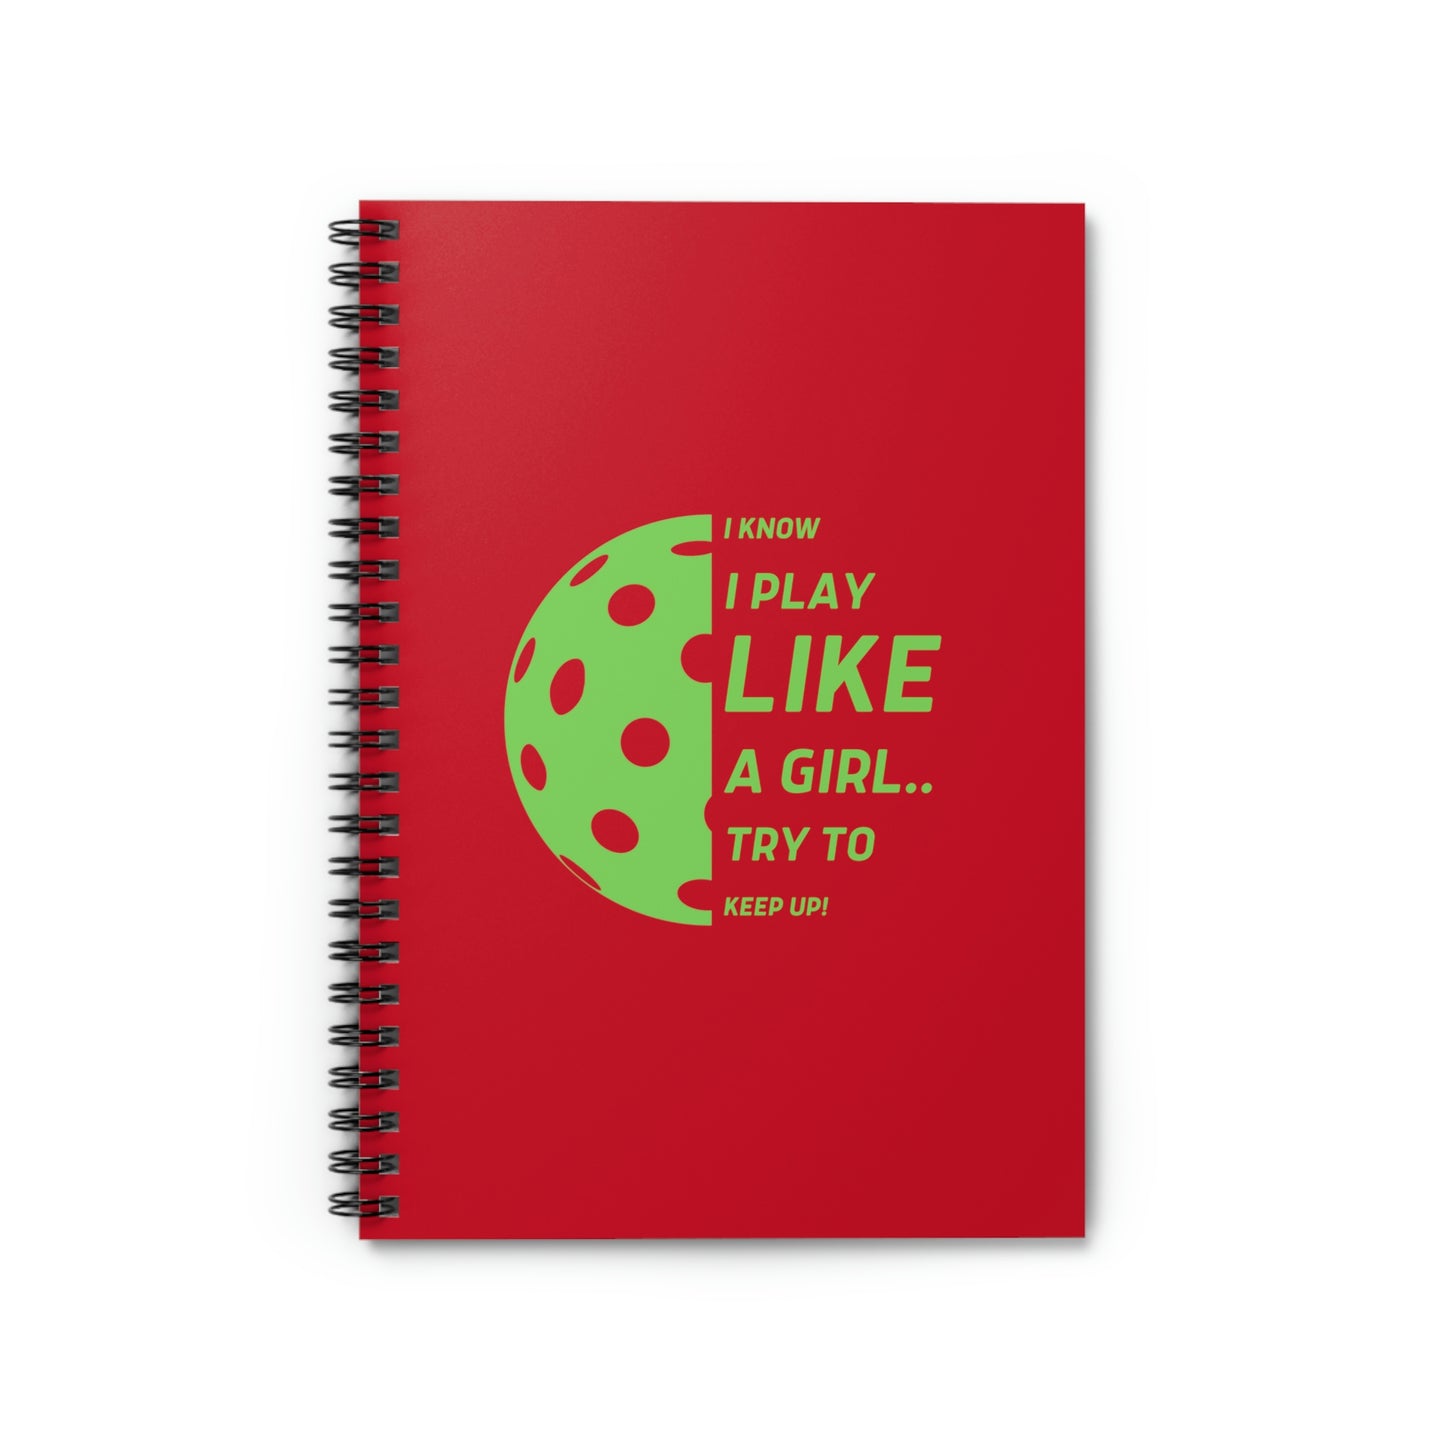 Spiral Notebook - Ruled Line  (Green Graphic)